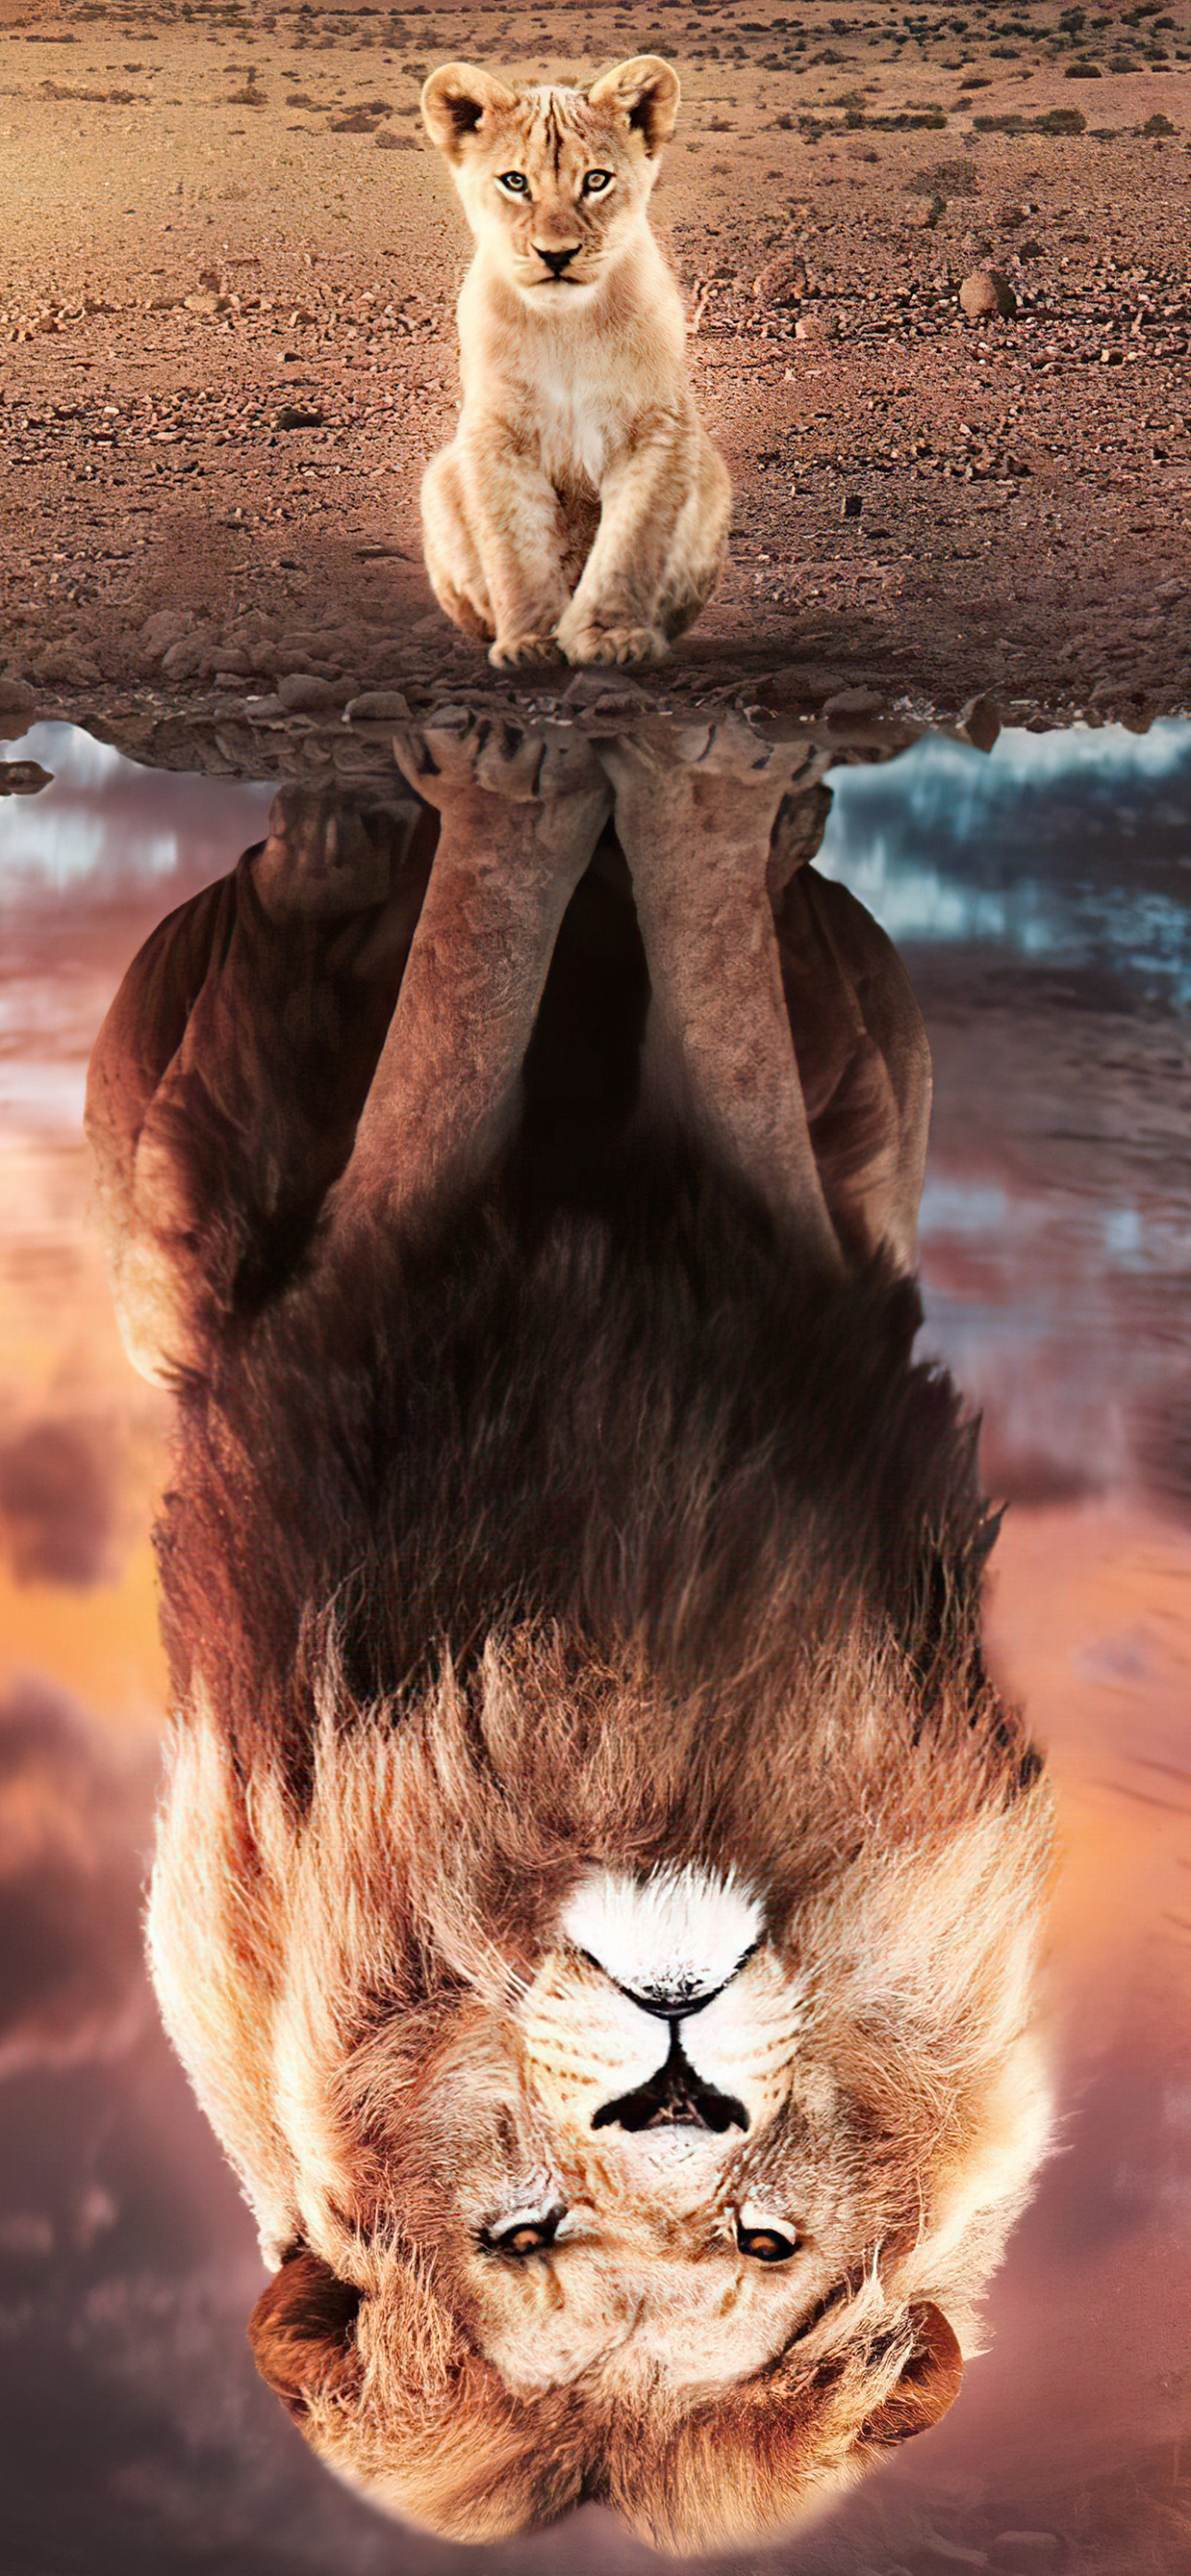 movie, the lion king (2019), reflection, lion